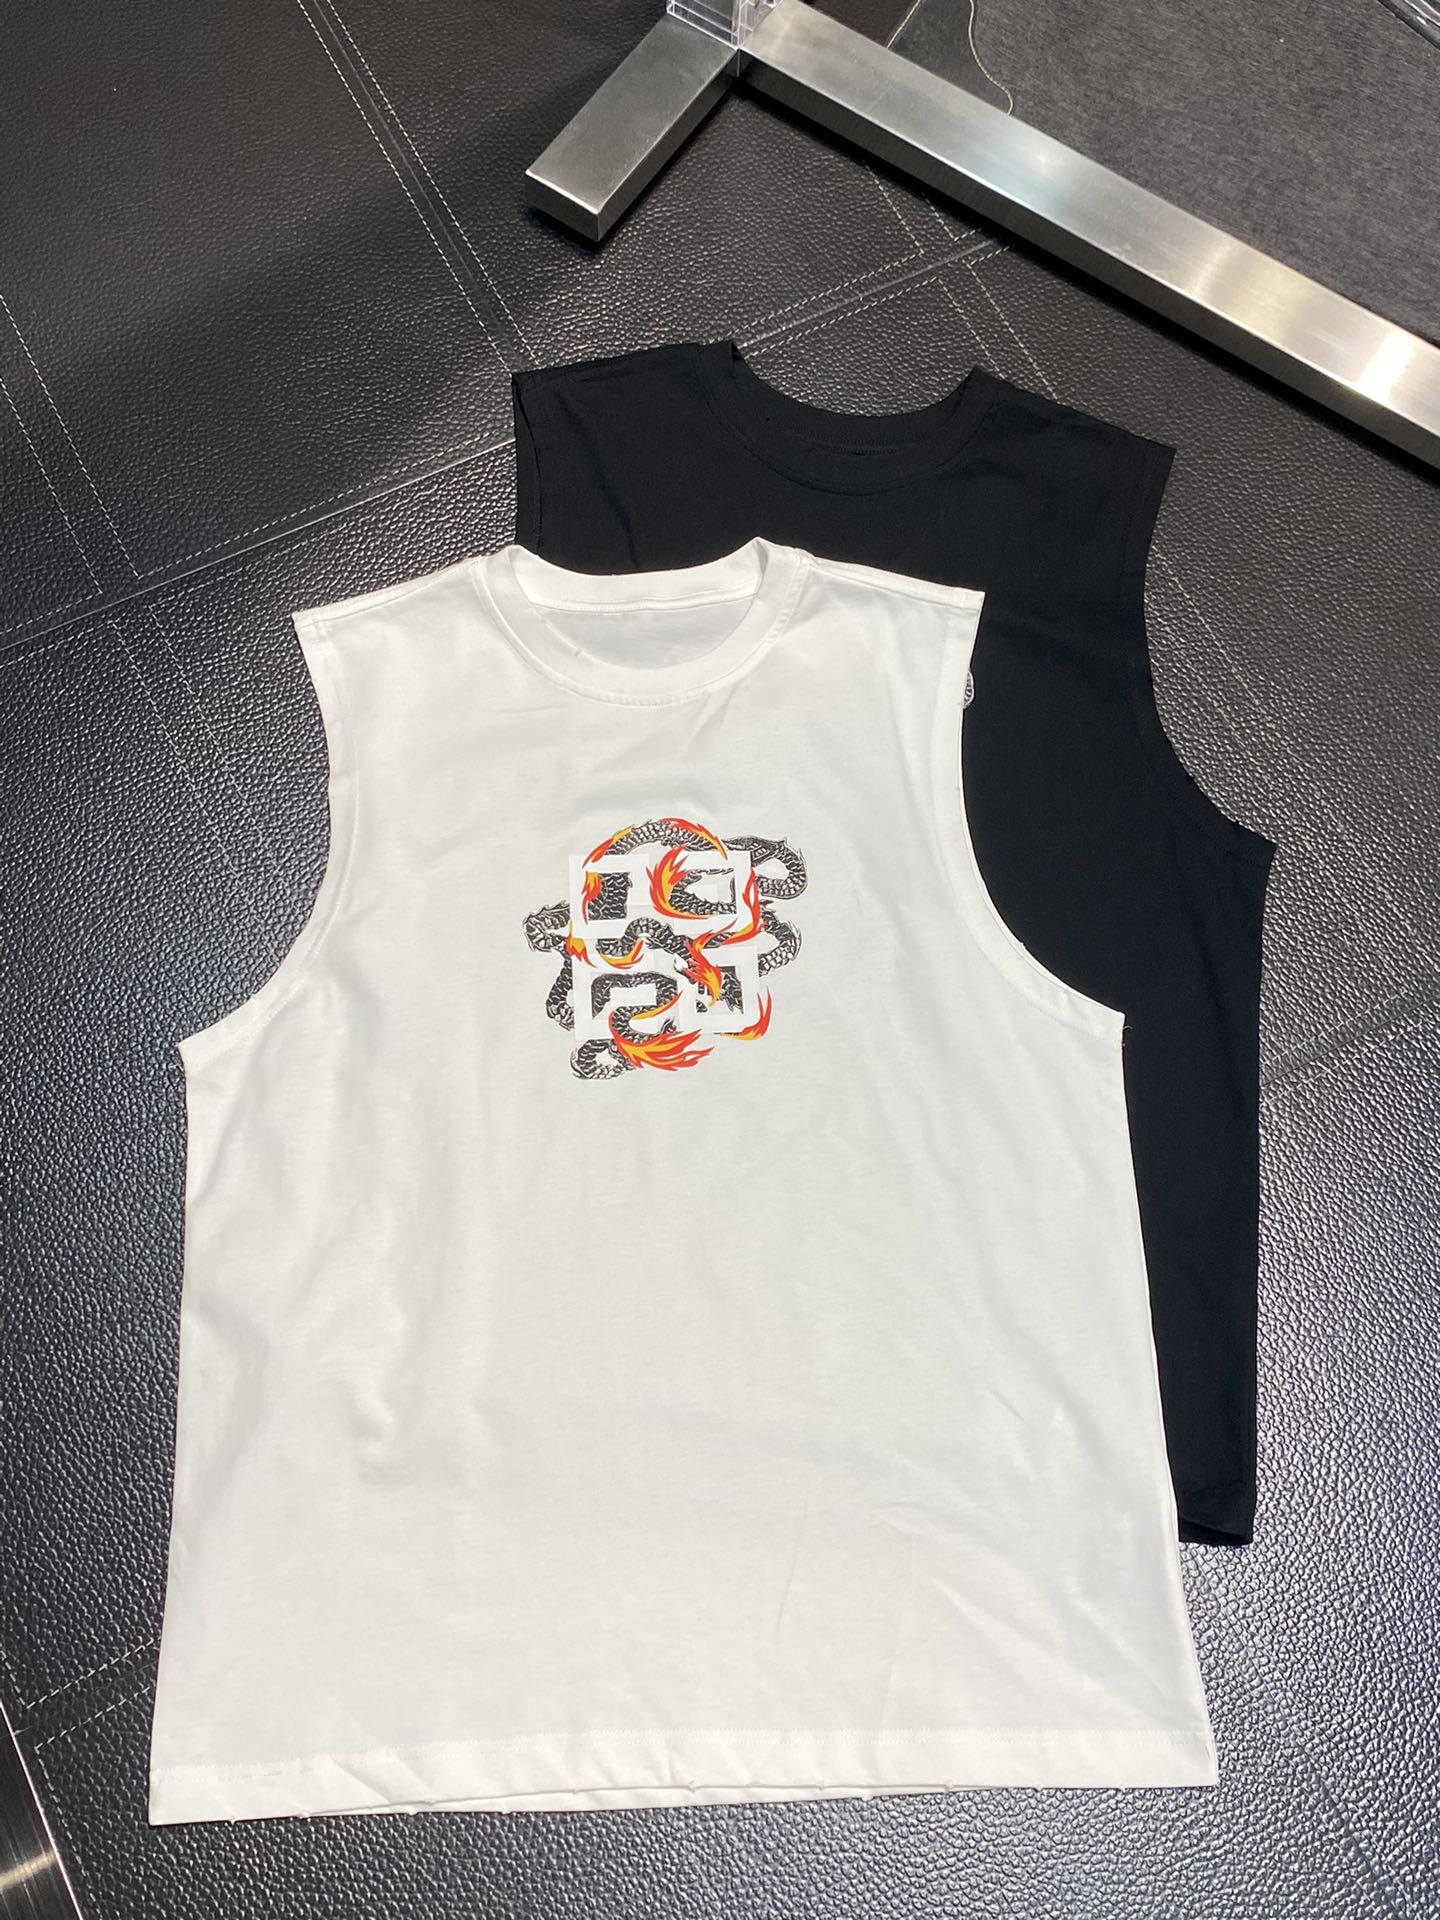 Found Replica
 Givenchy Clothing Tank Tops&Camis Men Fashion Casual